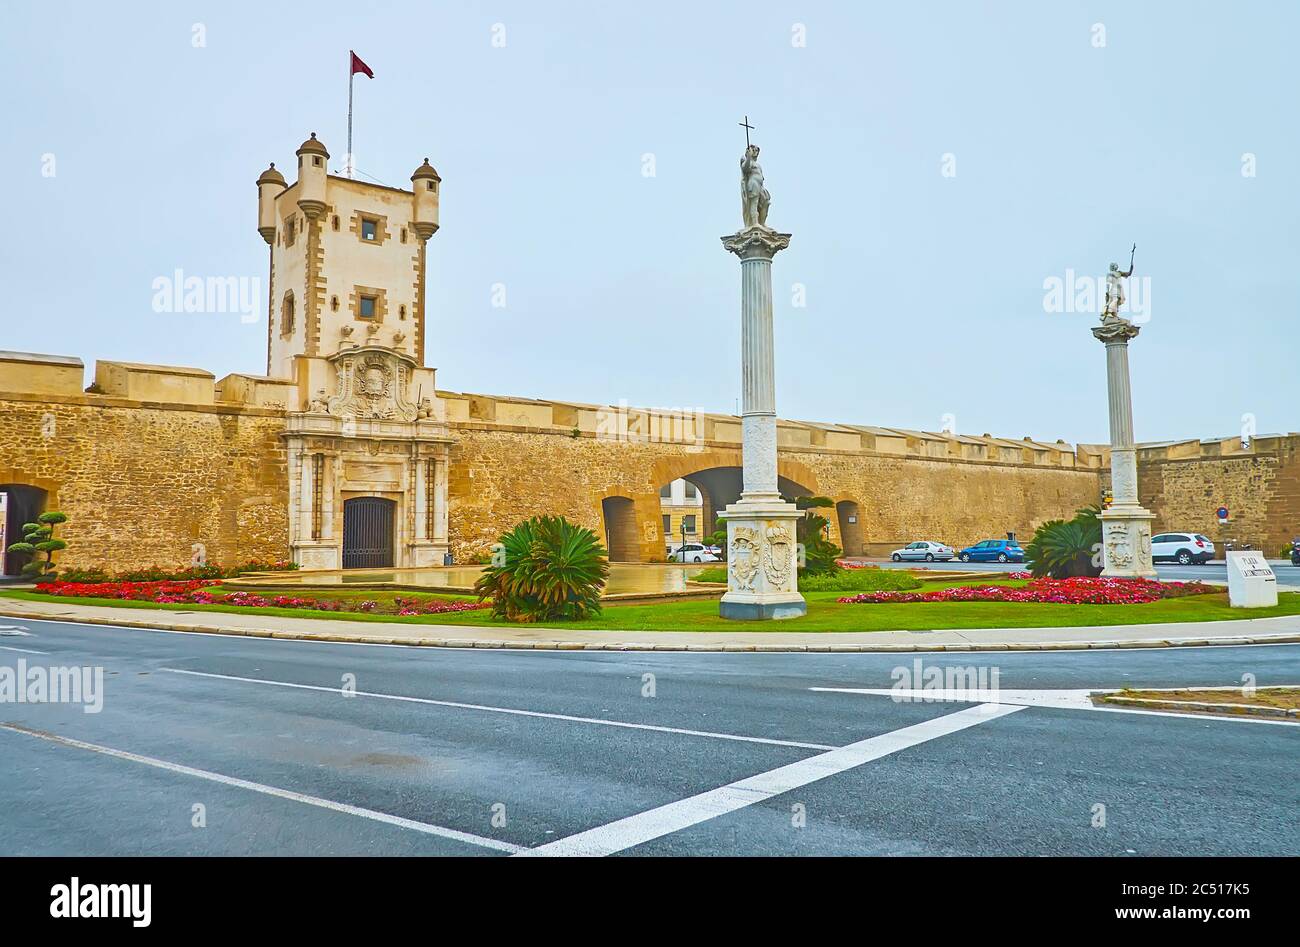 The medieval Earthen Gate (Earth Doors, Puertas de Tierra) with tower, fortress wall, white pillars with statues, located in Plaza de la Constitucion Stock Photo